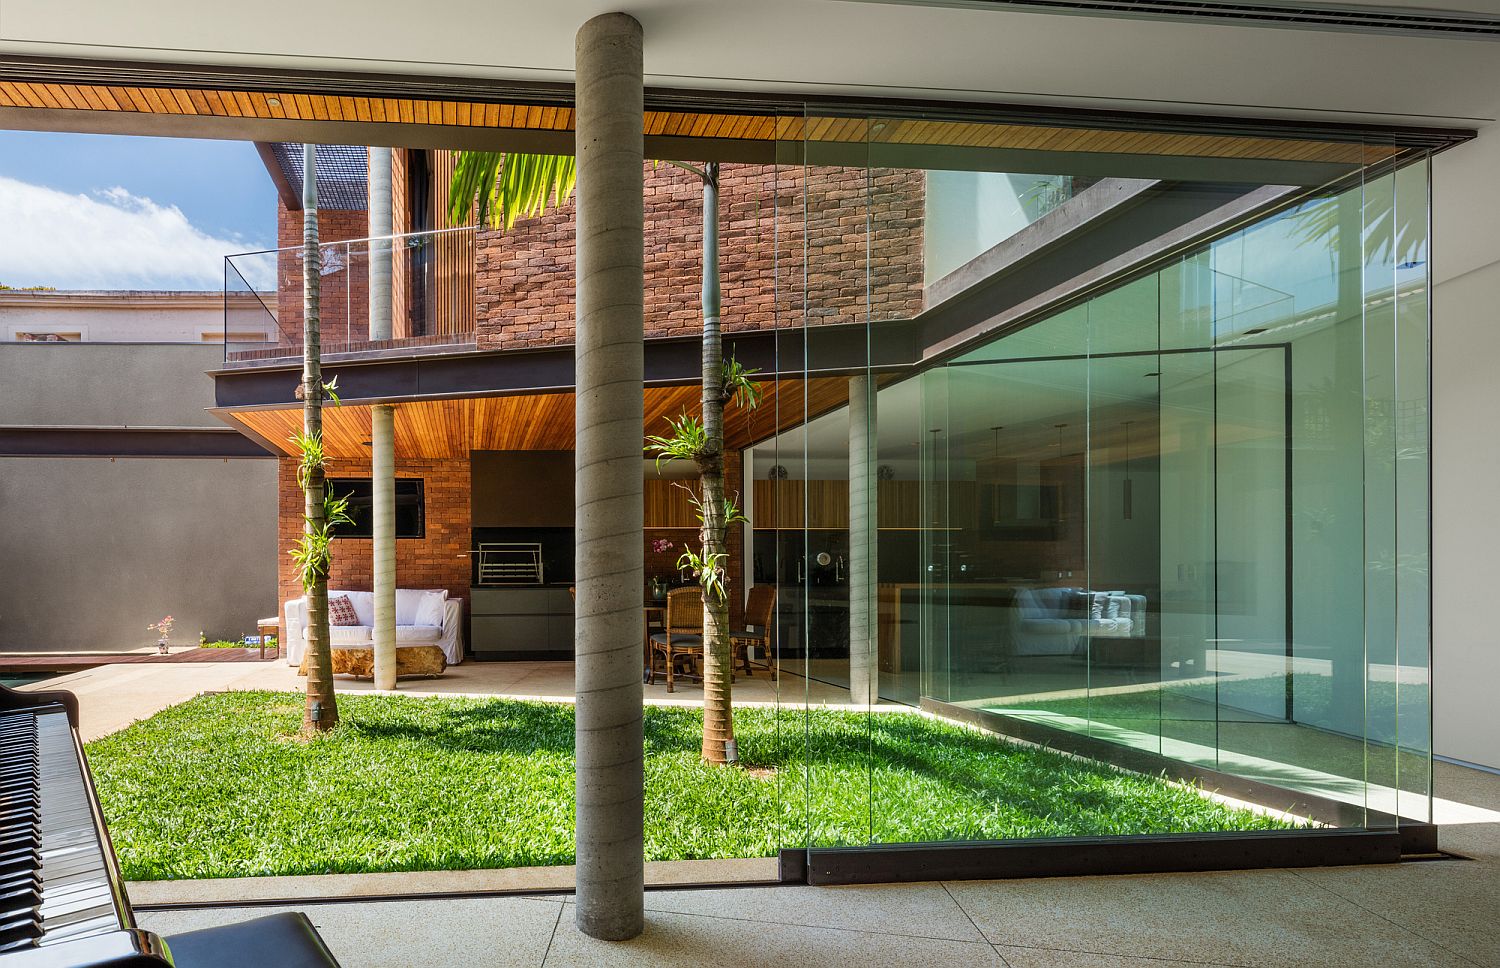 Sliding glass doors connect the open lower level with the central courtyard